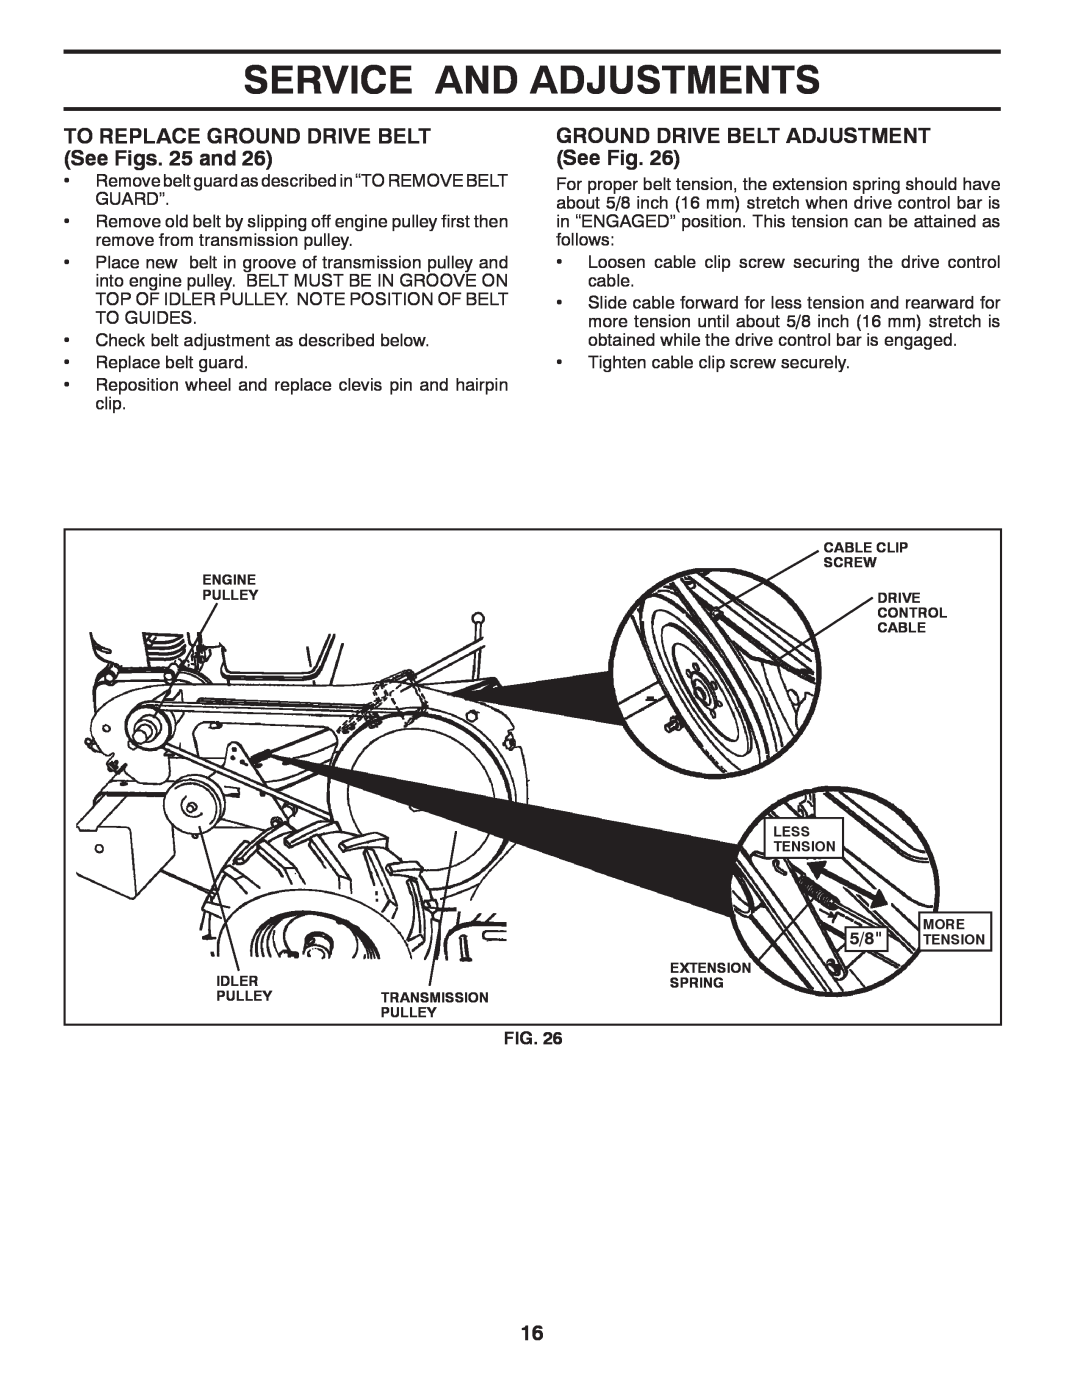 Husqvarna DRT70 owner manual TO REPLACE GROUND DRIVE BELT See Figs. 25 and, GROUND DRIVE BELT ADJUSTMENT See Fig 